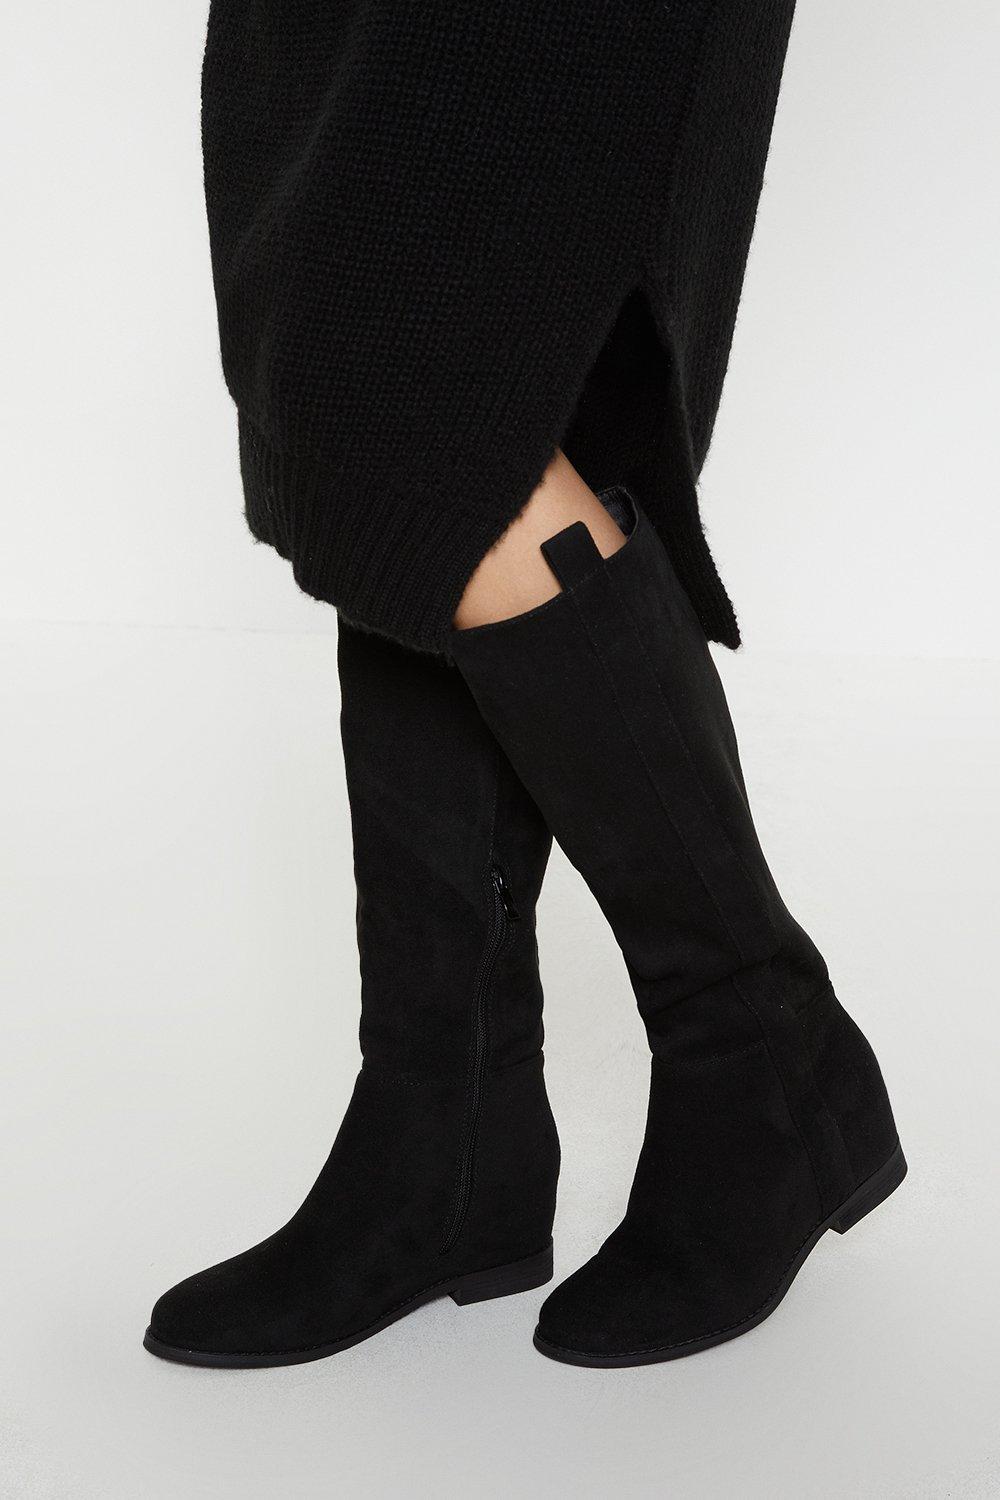 Women’s Krista Concealed Wedge Knee High Boots - natural black - 3